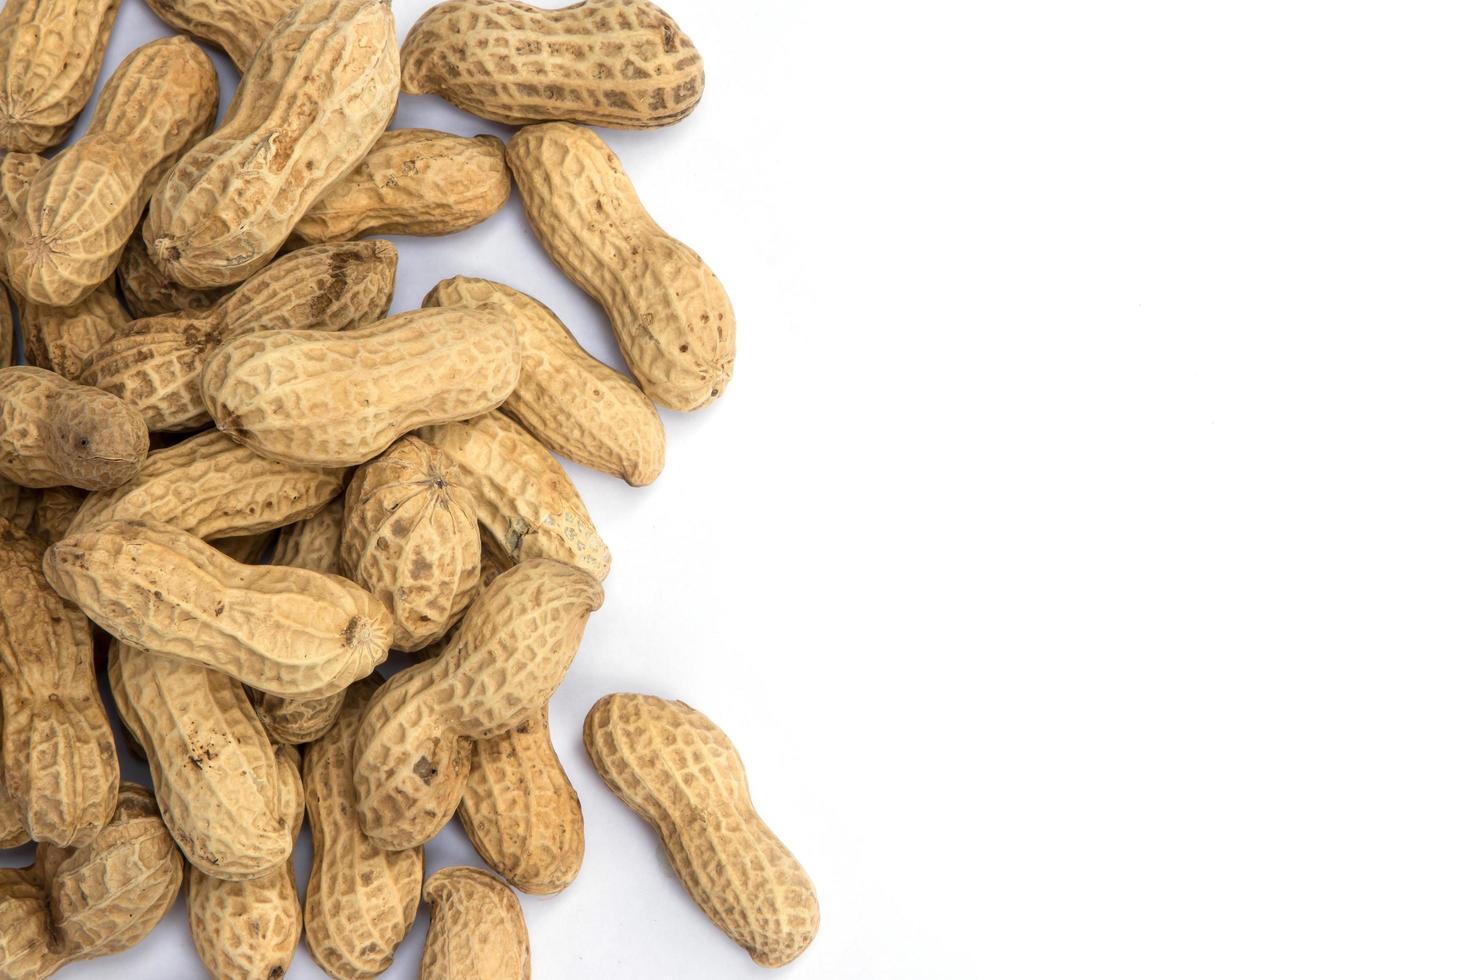 Dried peanuts in closeup on the white background photo